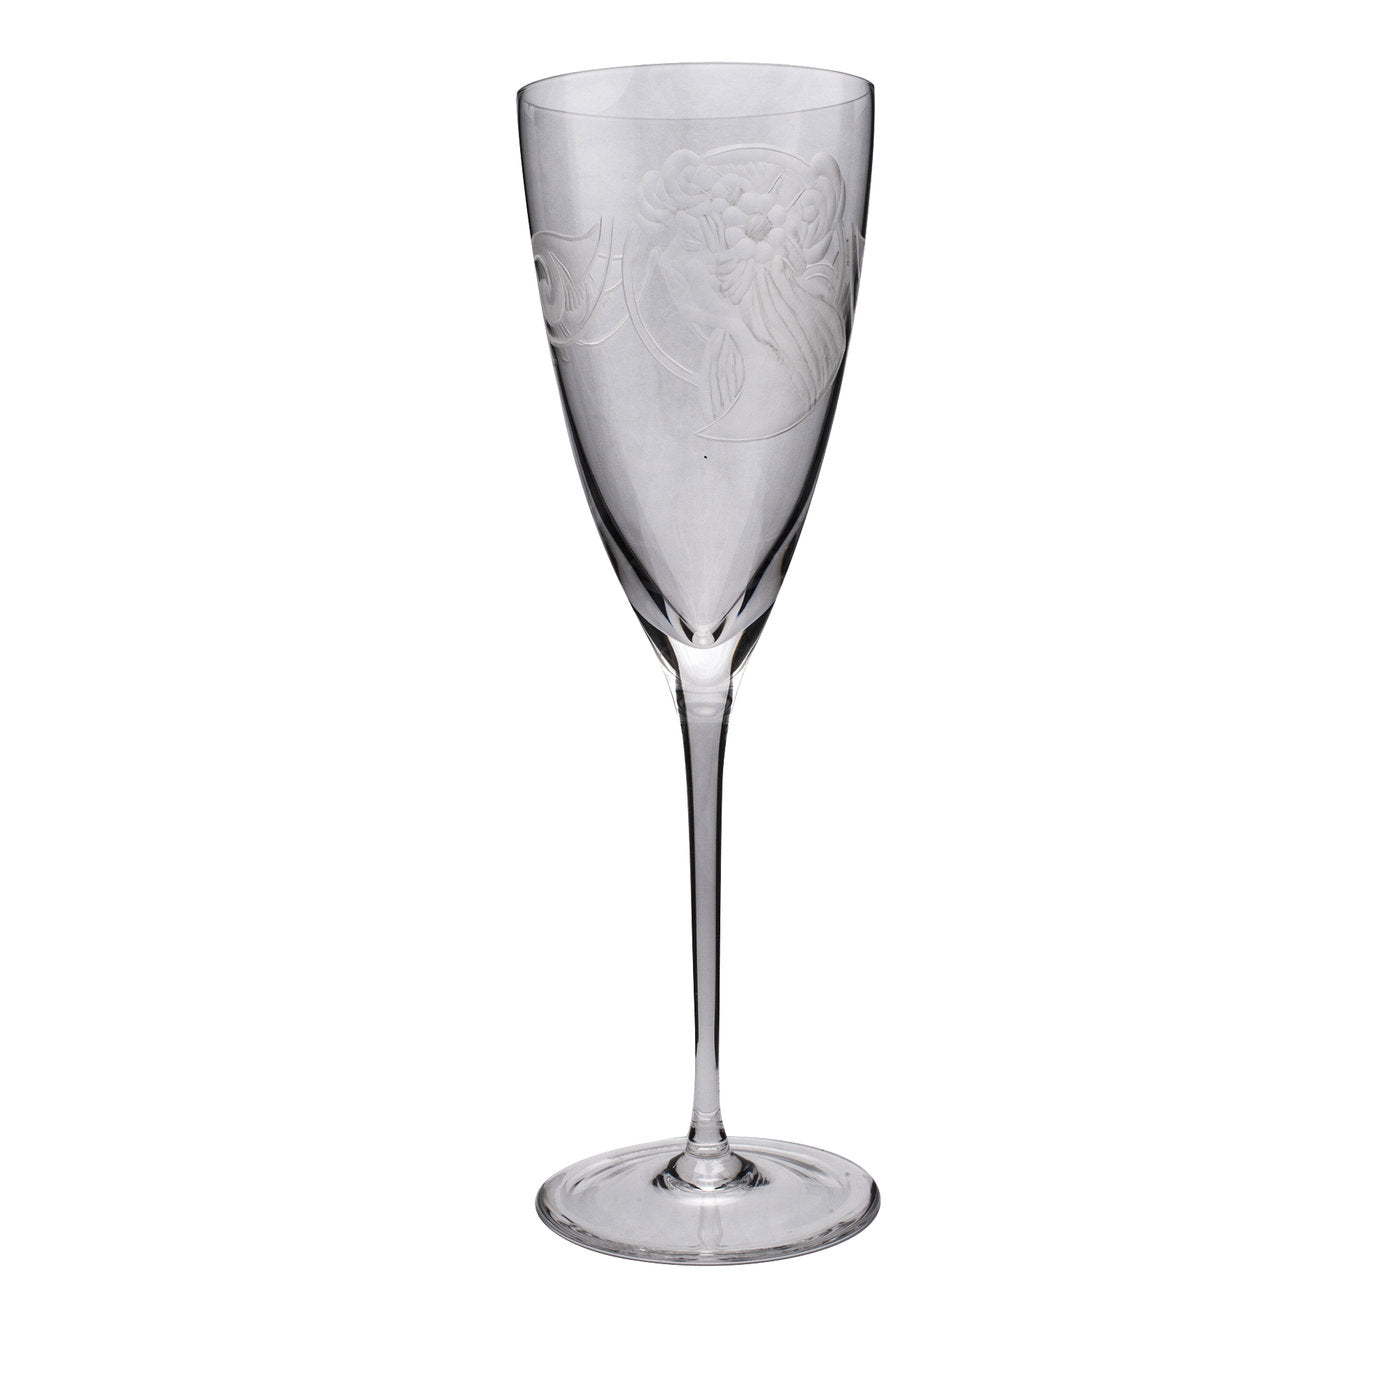 Set of 6 Water Glasses - Alternative view 1